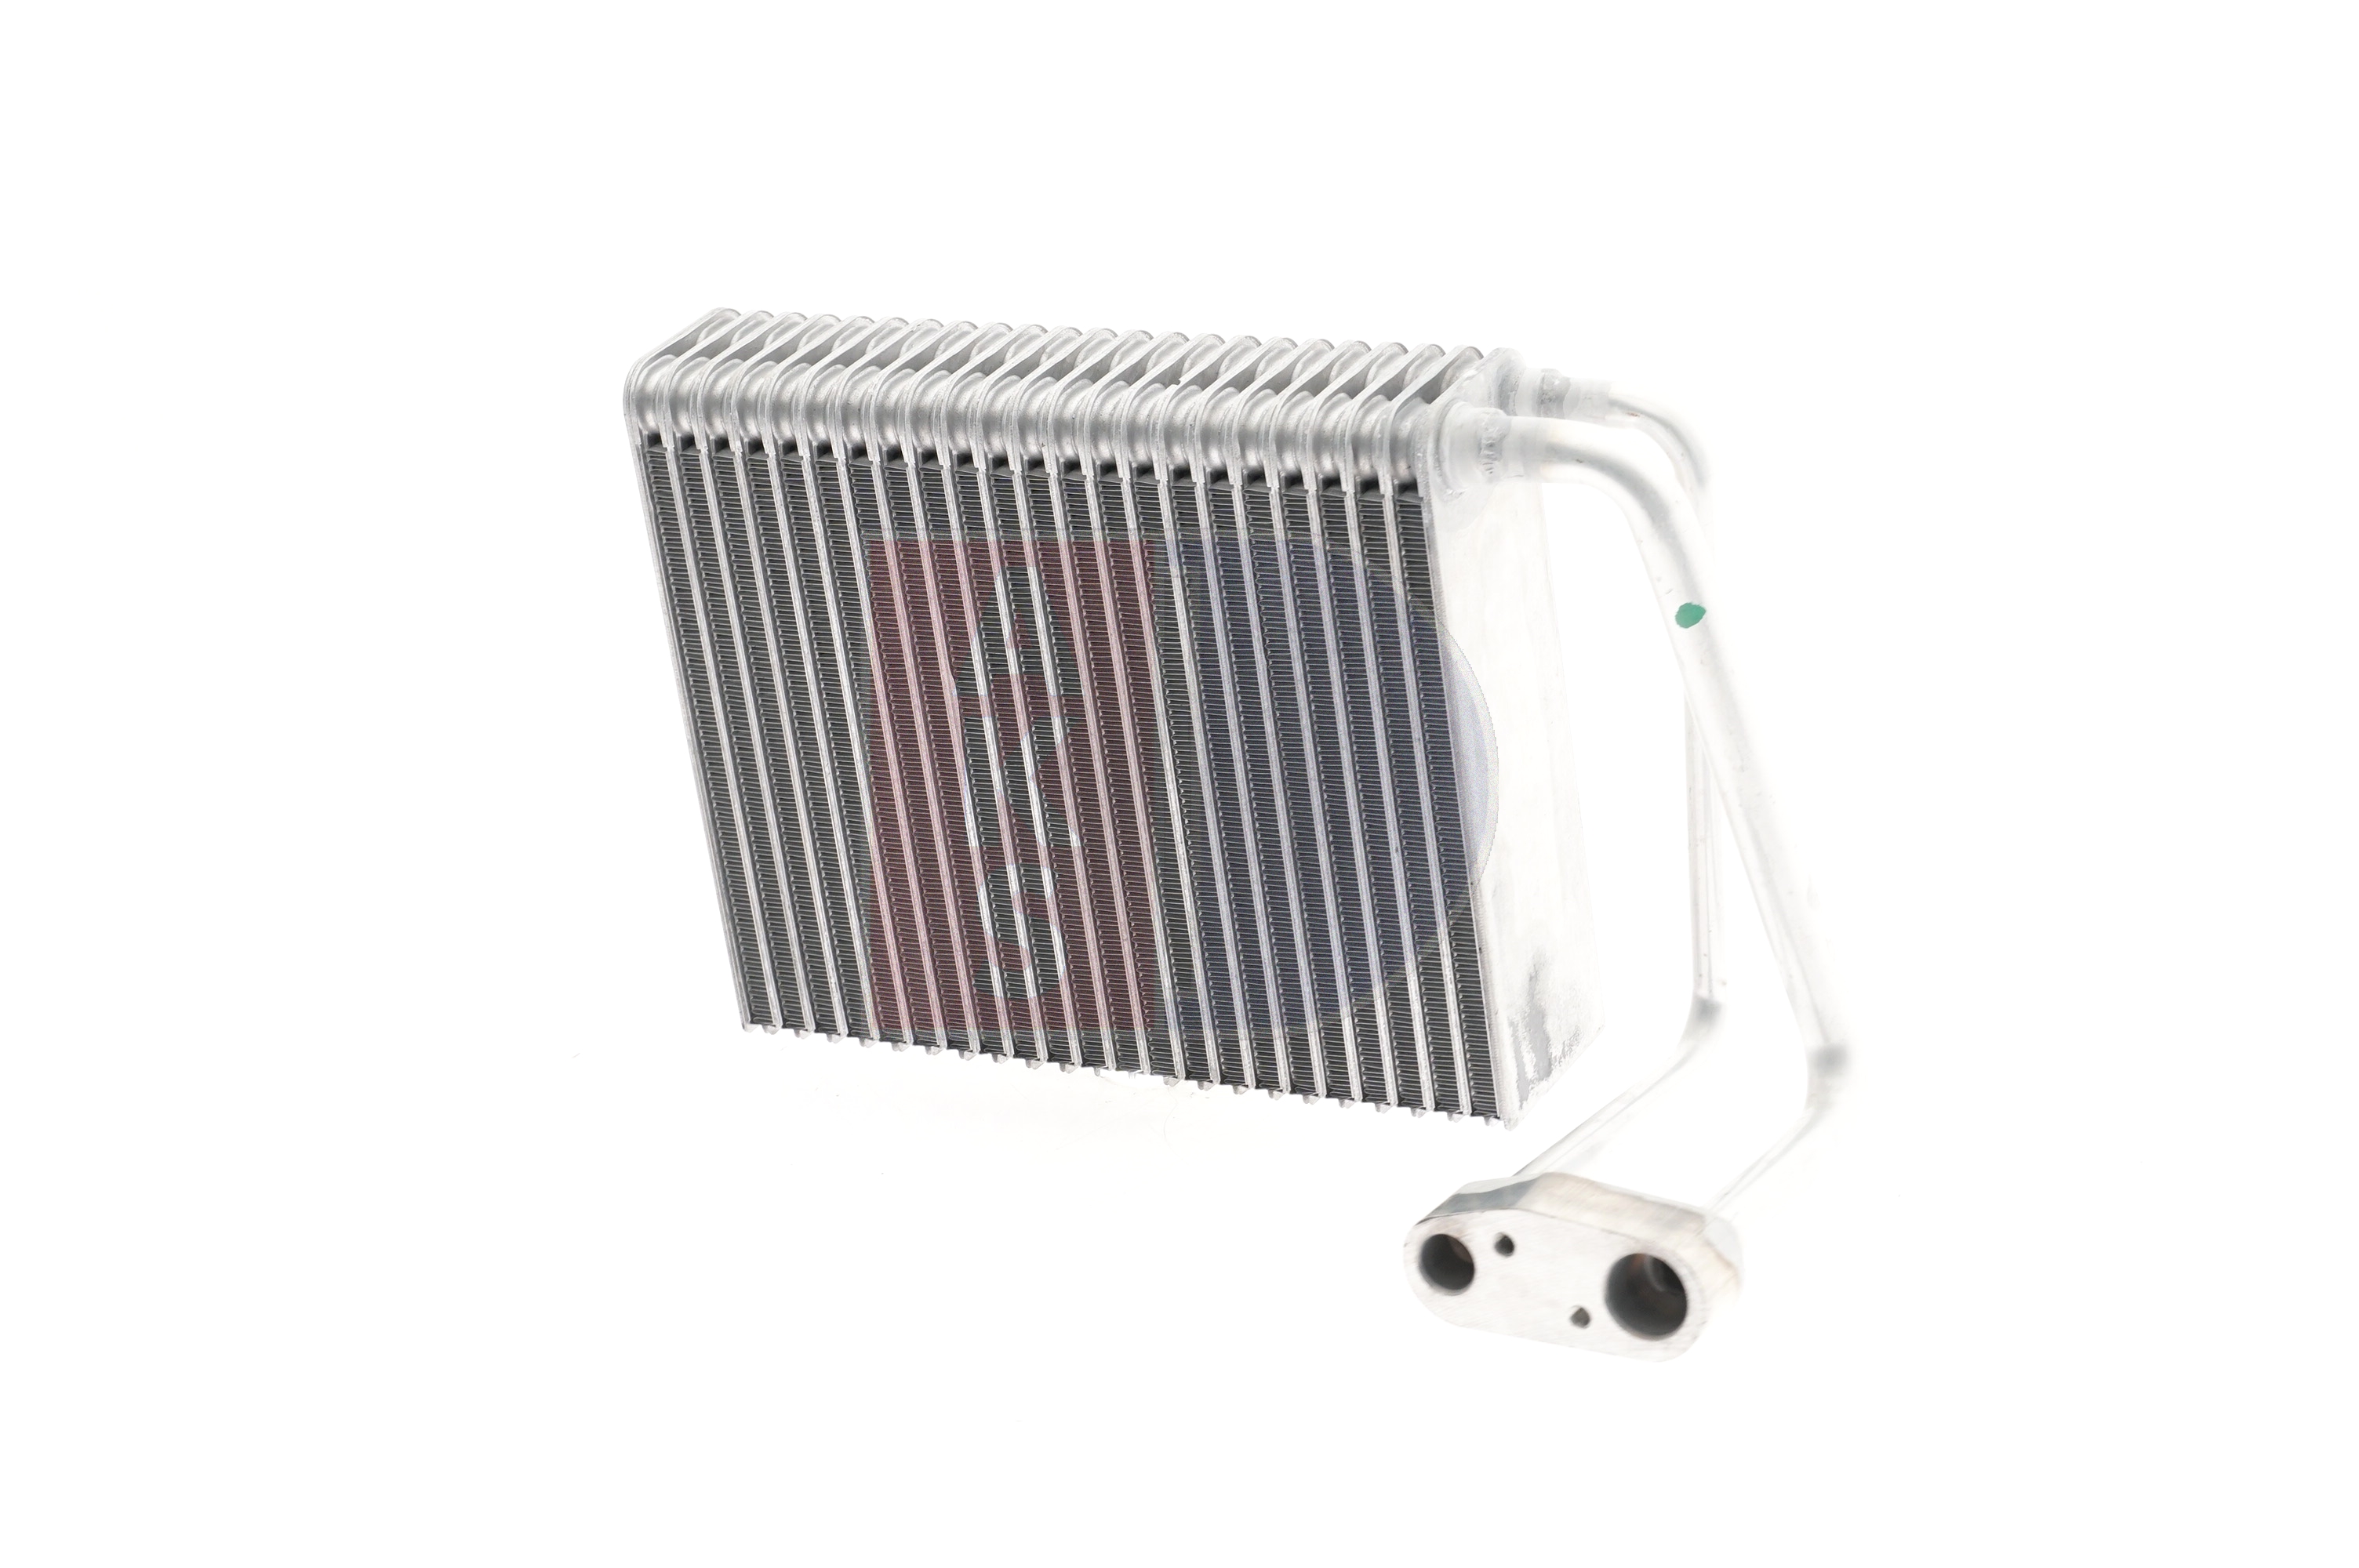 Land Rover Air conditioning evaporator AKS DASIS 820375N at a good price